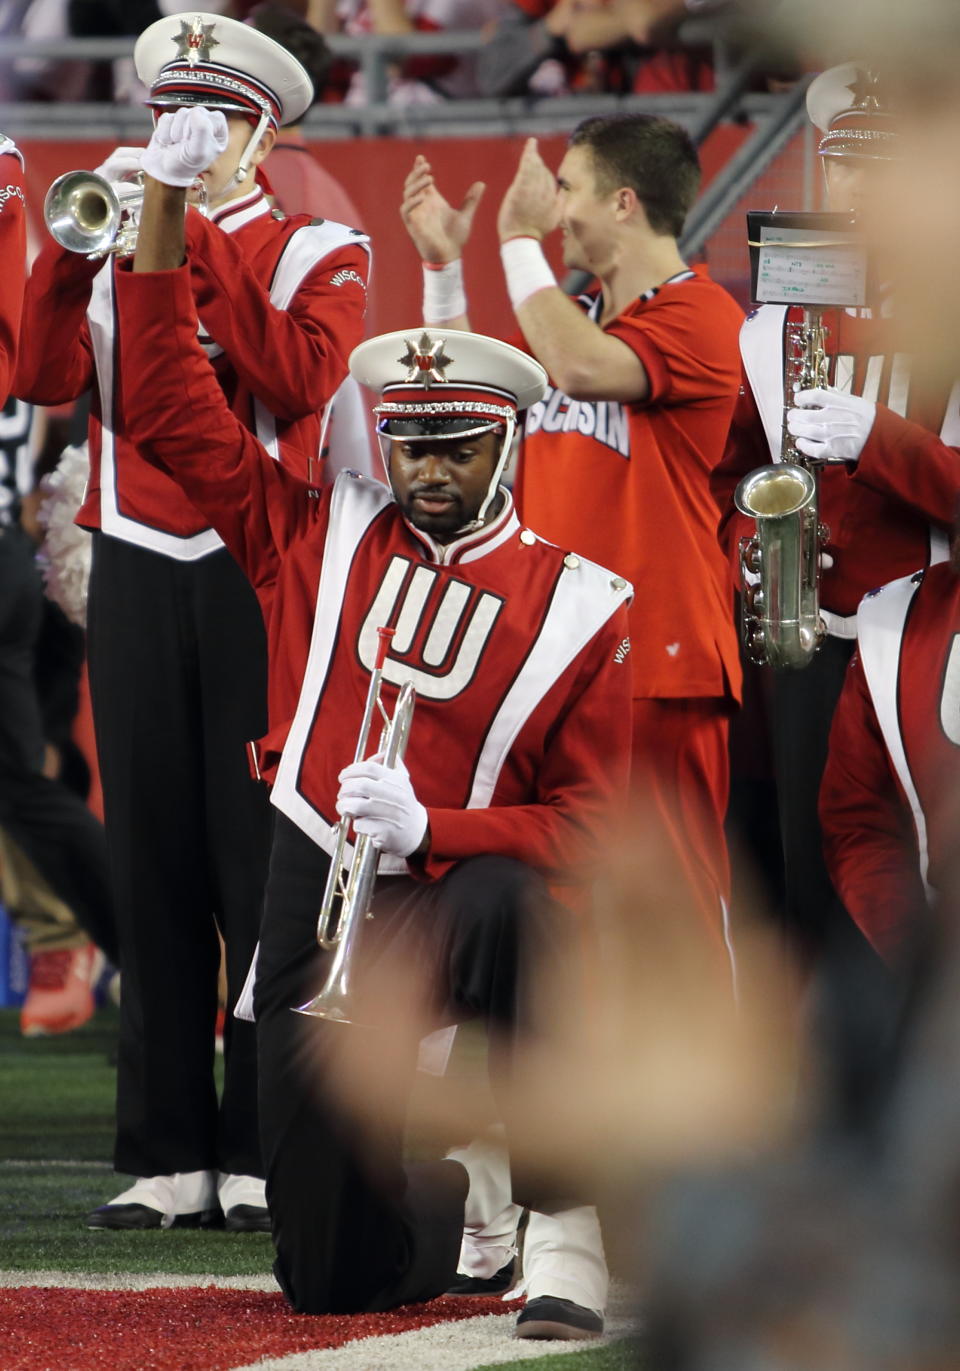 Wisconsin Badger band